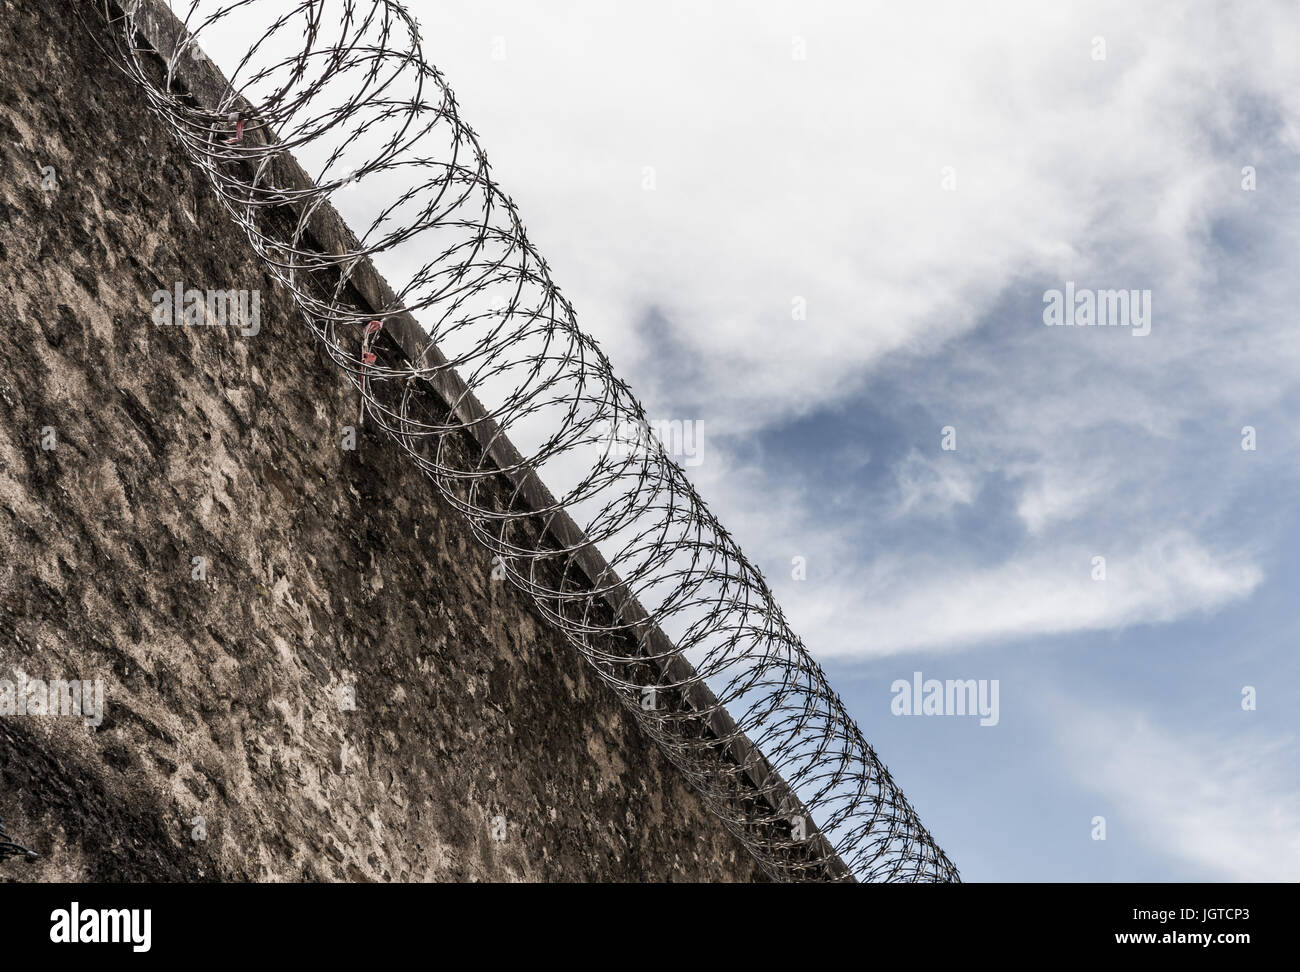 Concrete wall of the prison with cutting steel barbed wire Stock Photo